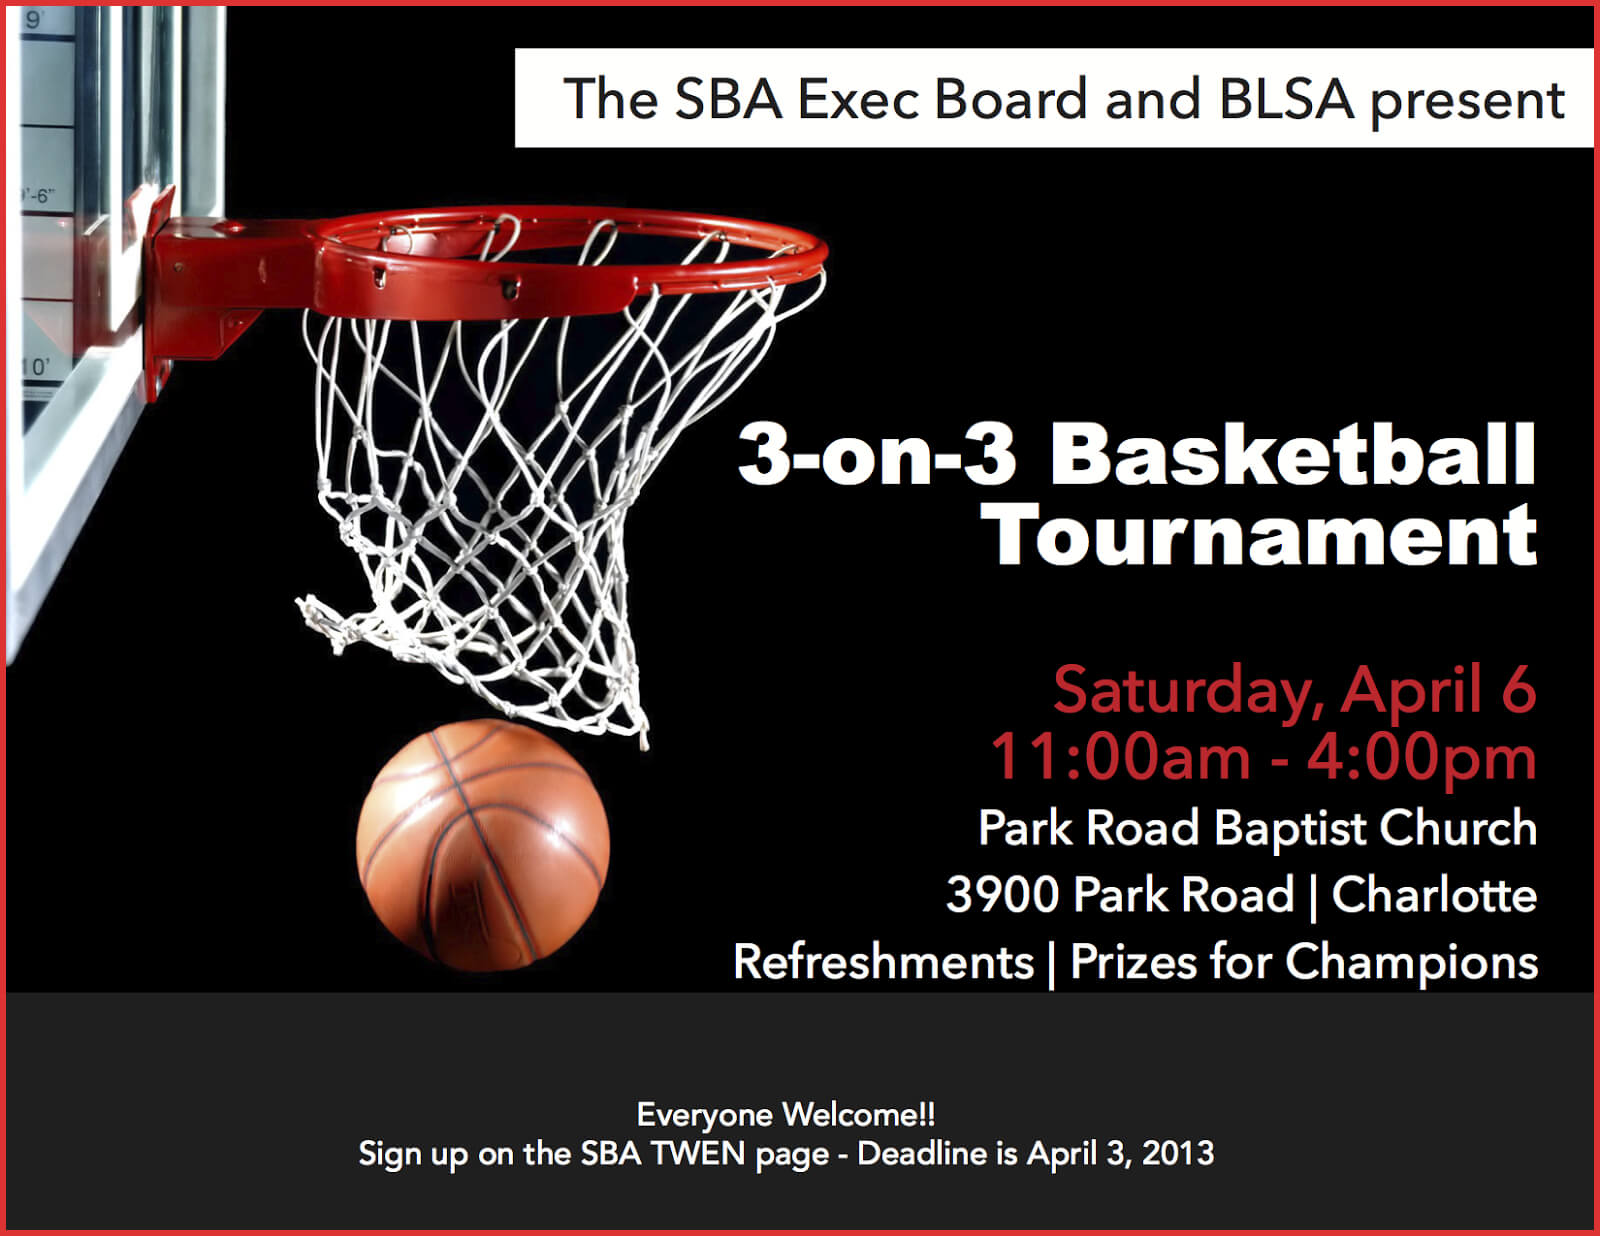 008 On Basketball Tournament Flyer Template Free Ideas Fresh With 3 On 3 Basketball Tournament Flyer Template